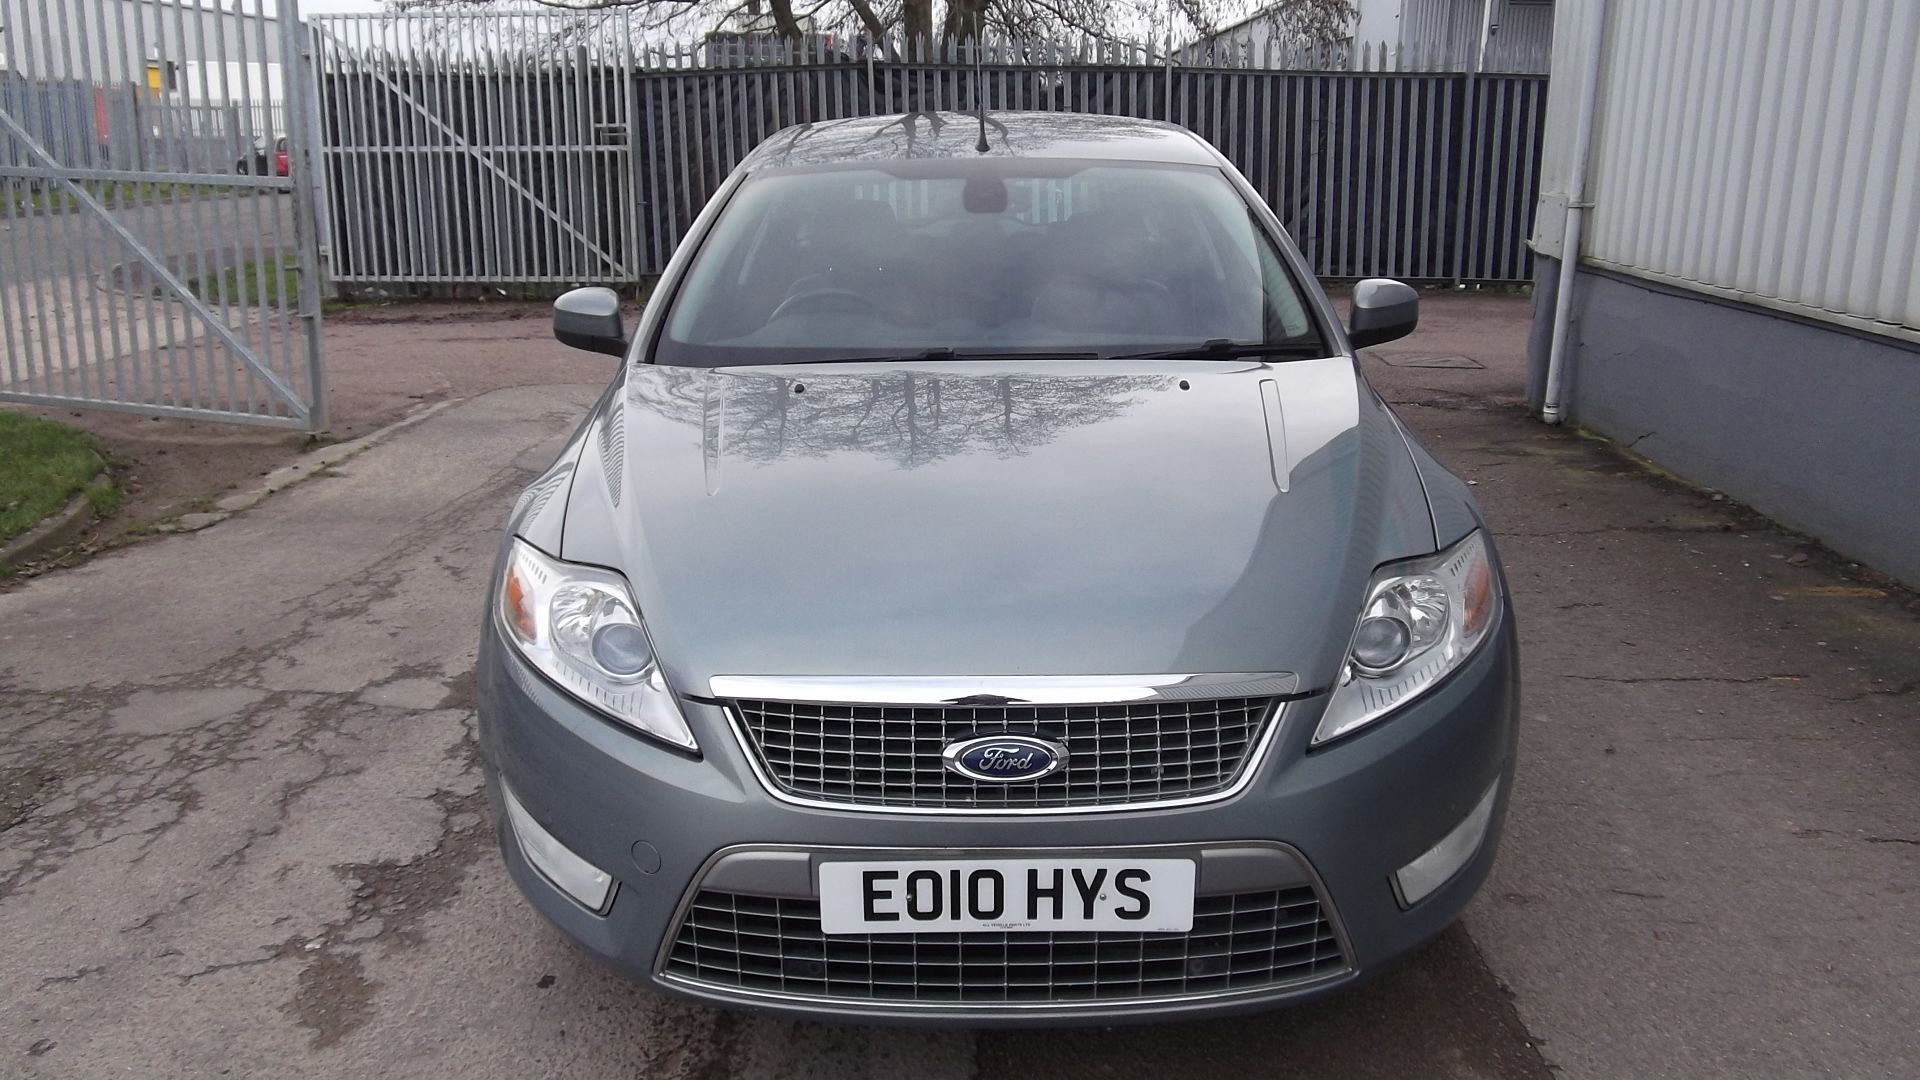 2010 Ford Mondeo Titanium X Tdci A 5Dr Estate - Full Service History - CL505 - NO VAT ON THE HAMMER - Image 3 of 24